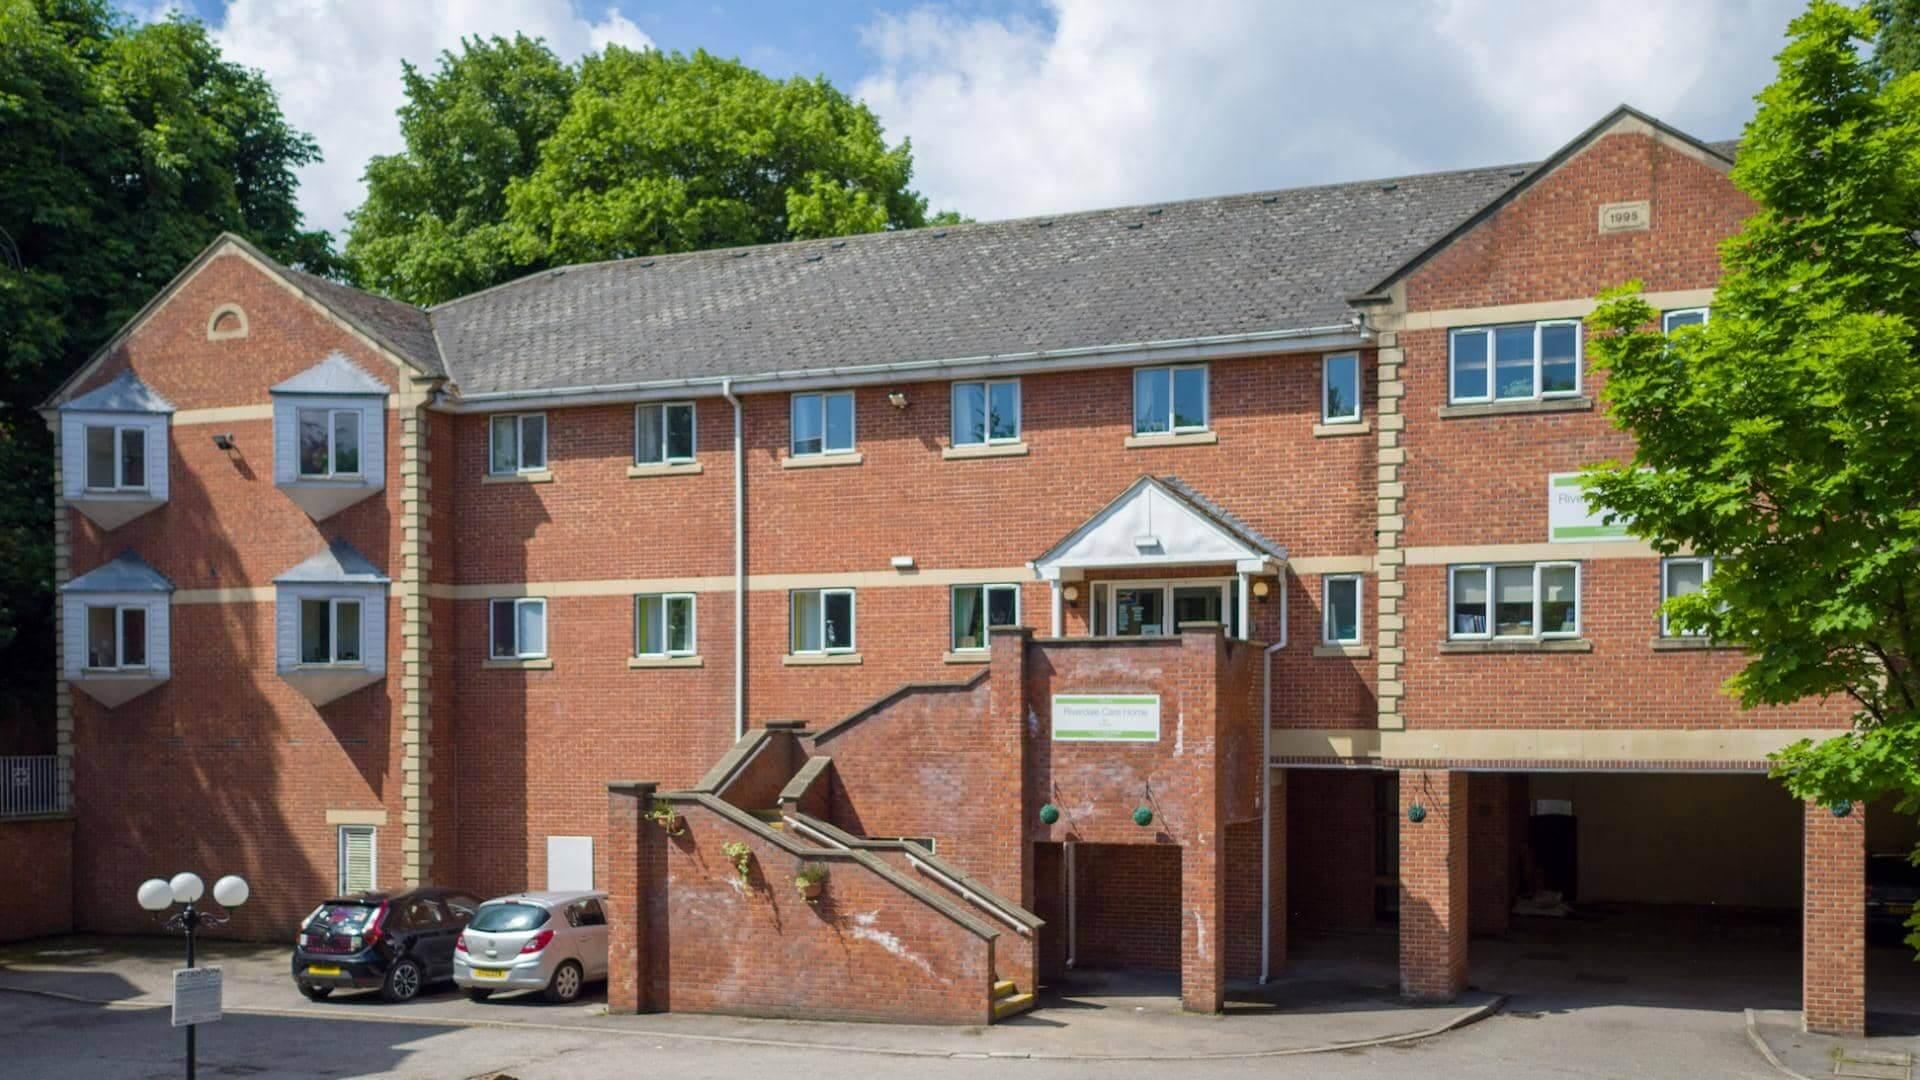 Riverdale care homes in chesterfield